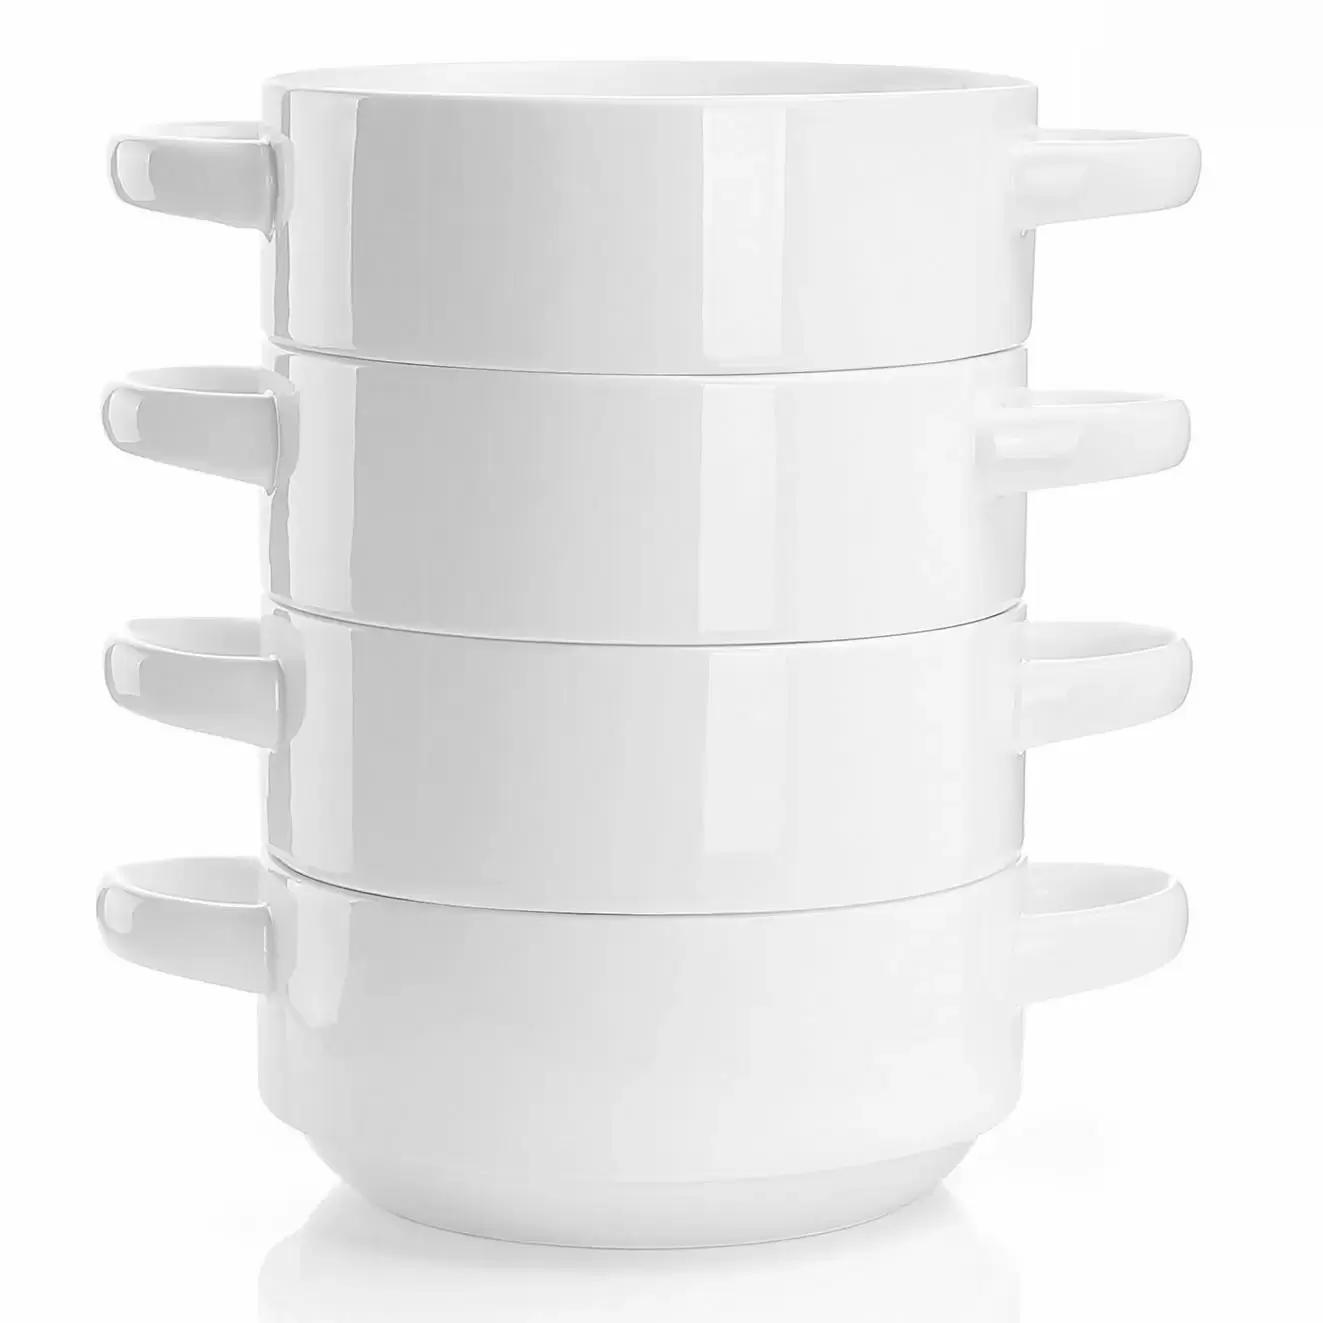 4 Sweese Porcelain Bowls with Handles for $15.94 Shipped